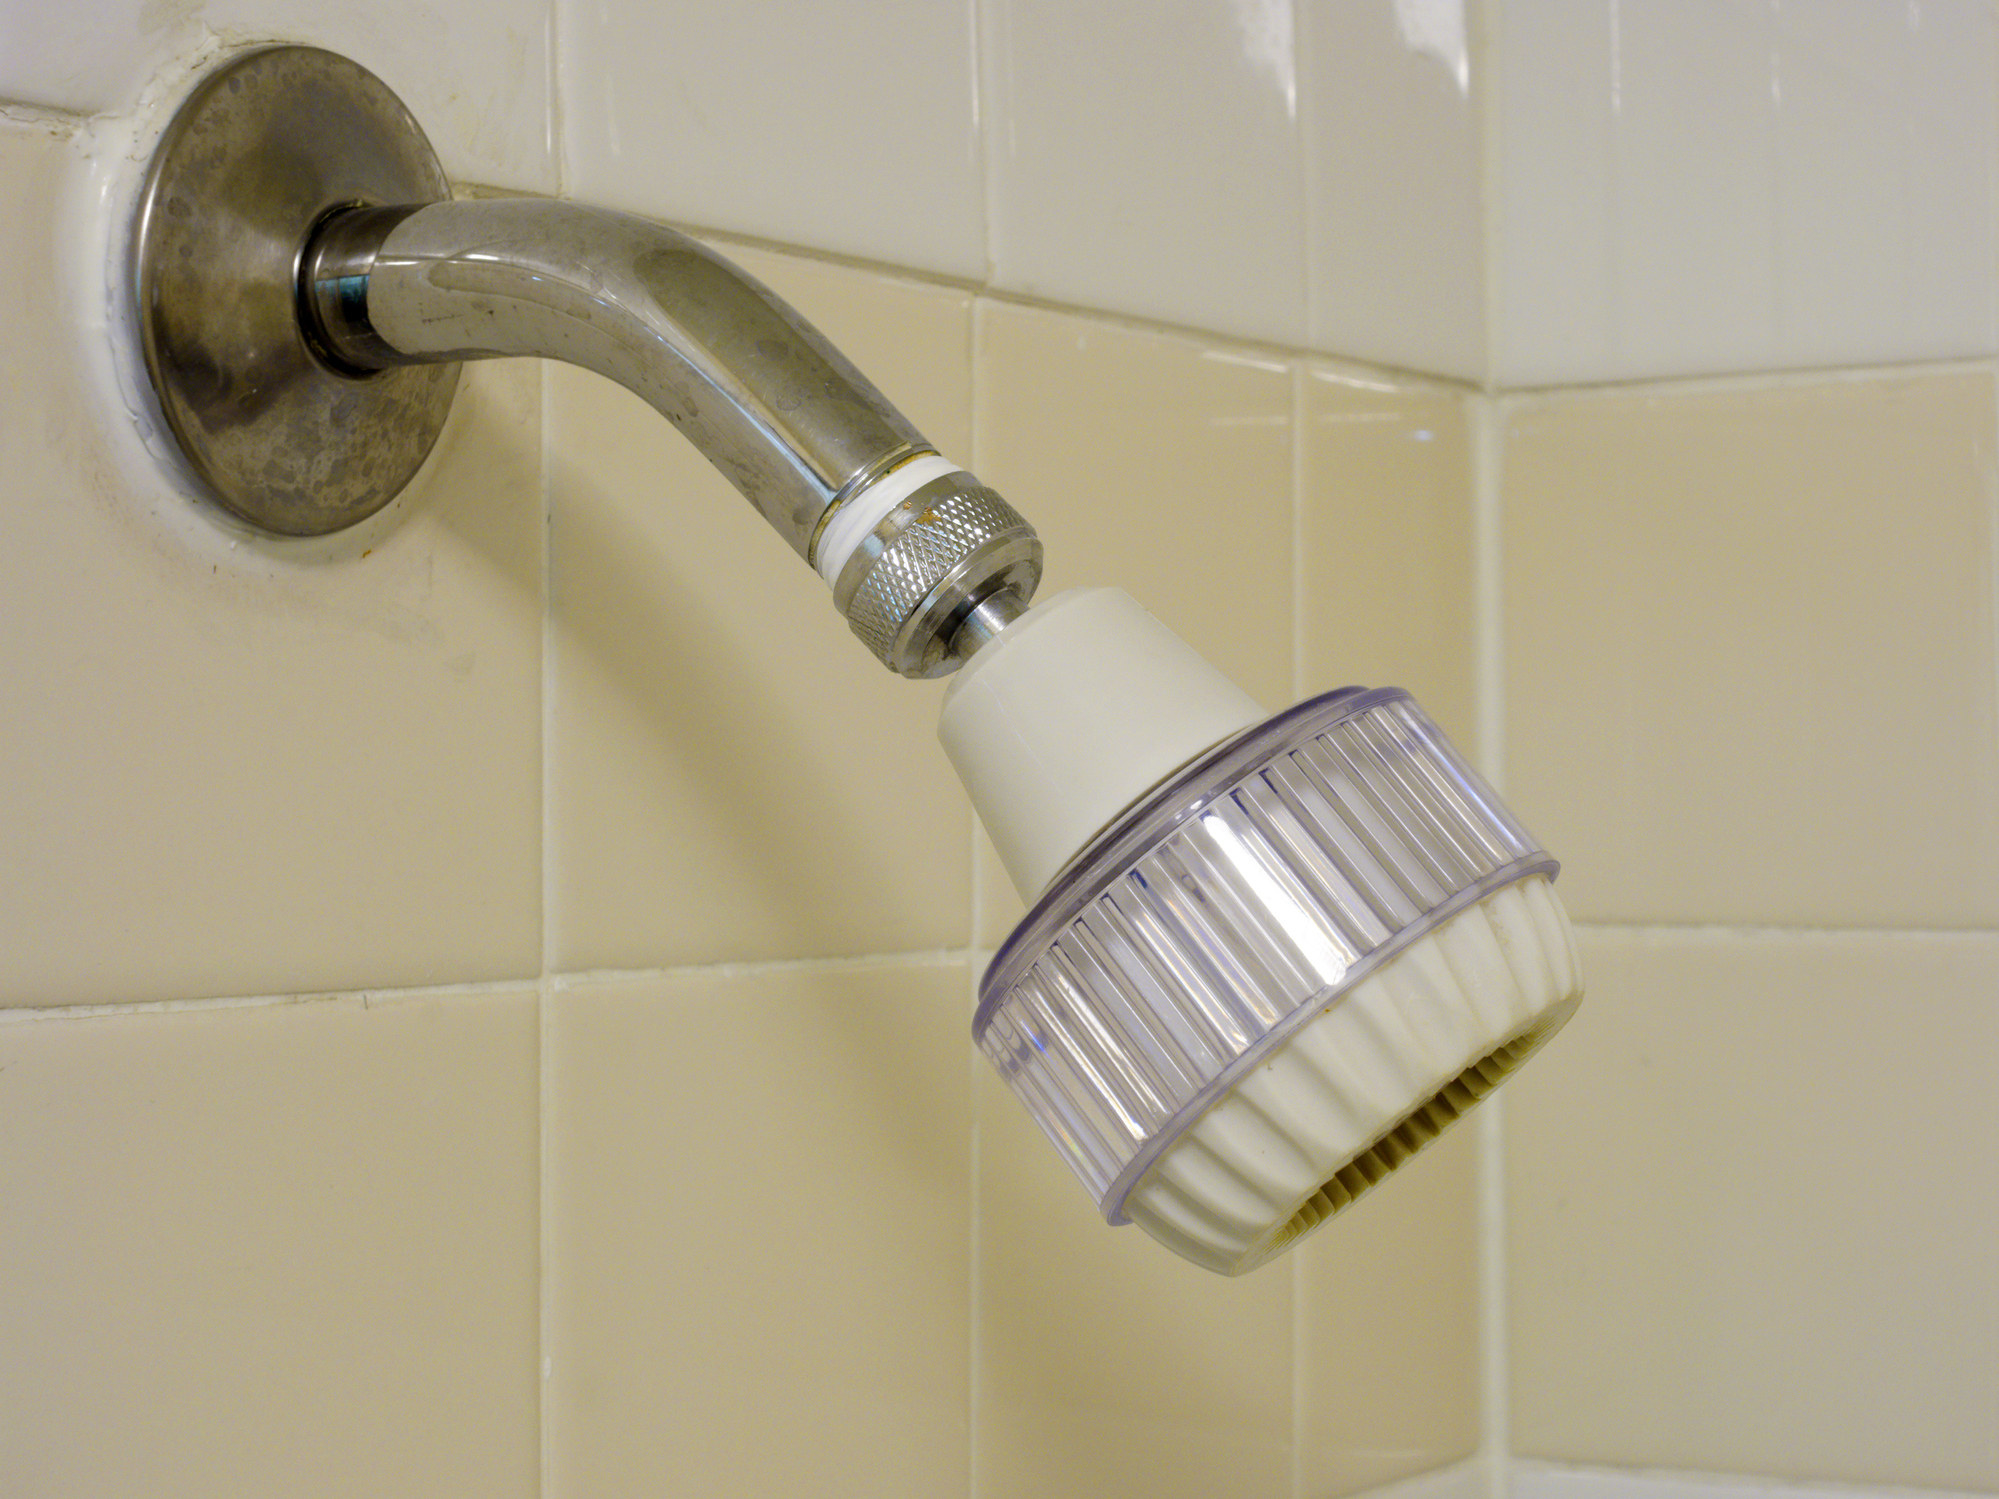 Another showerhead